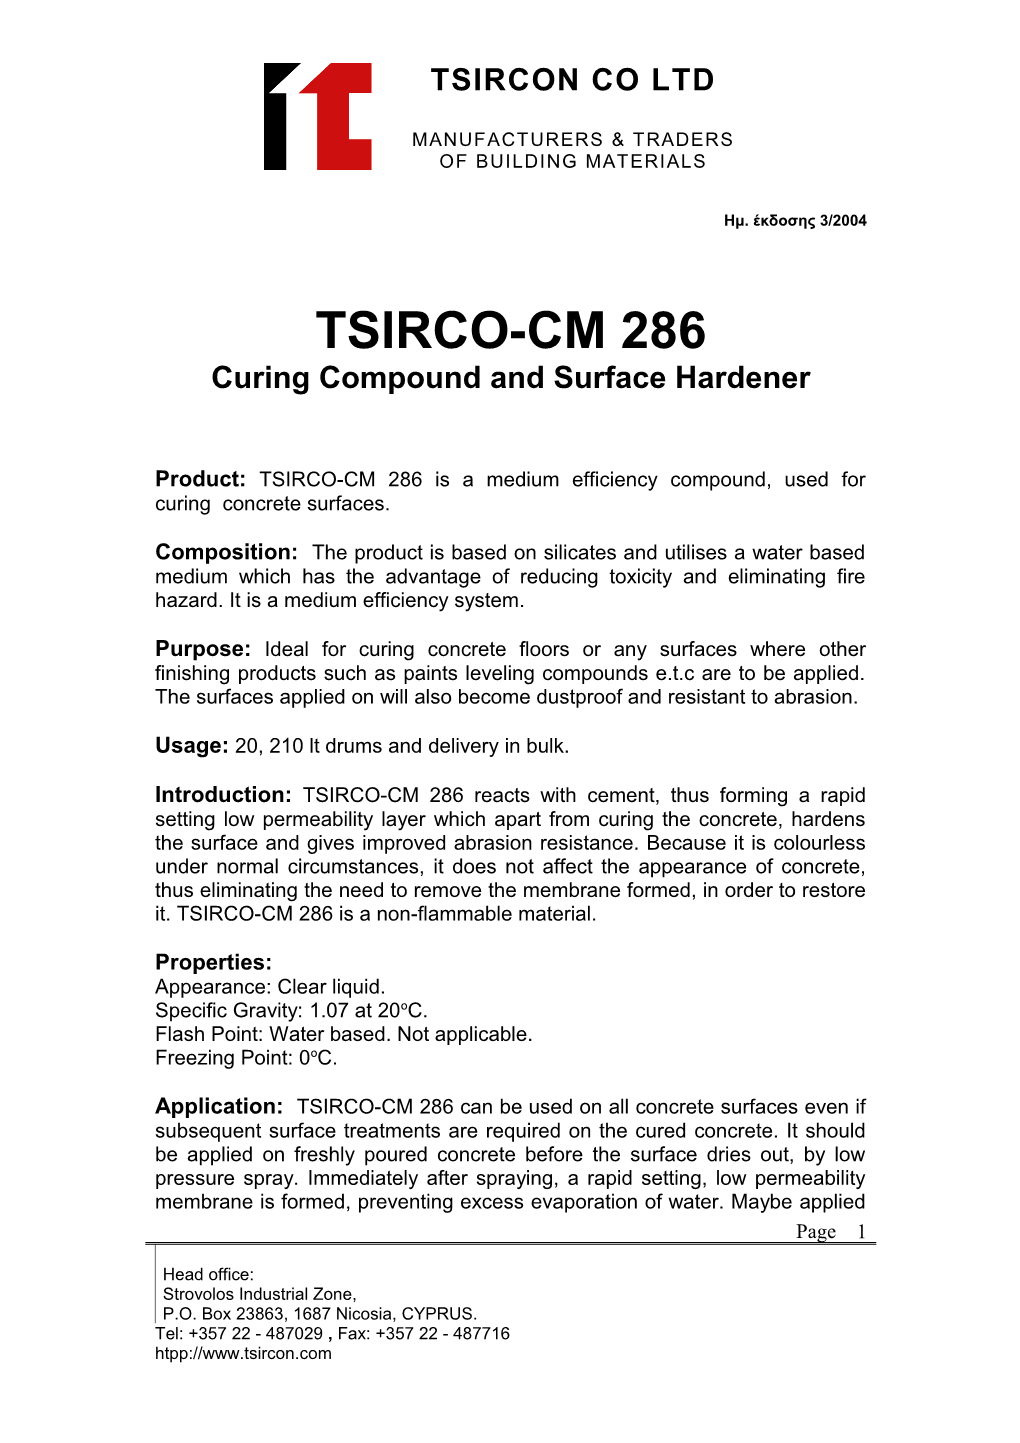 Curing Compound and Surface Hardener